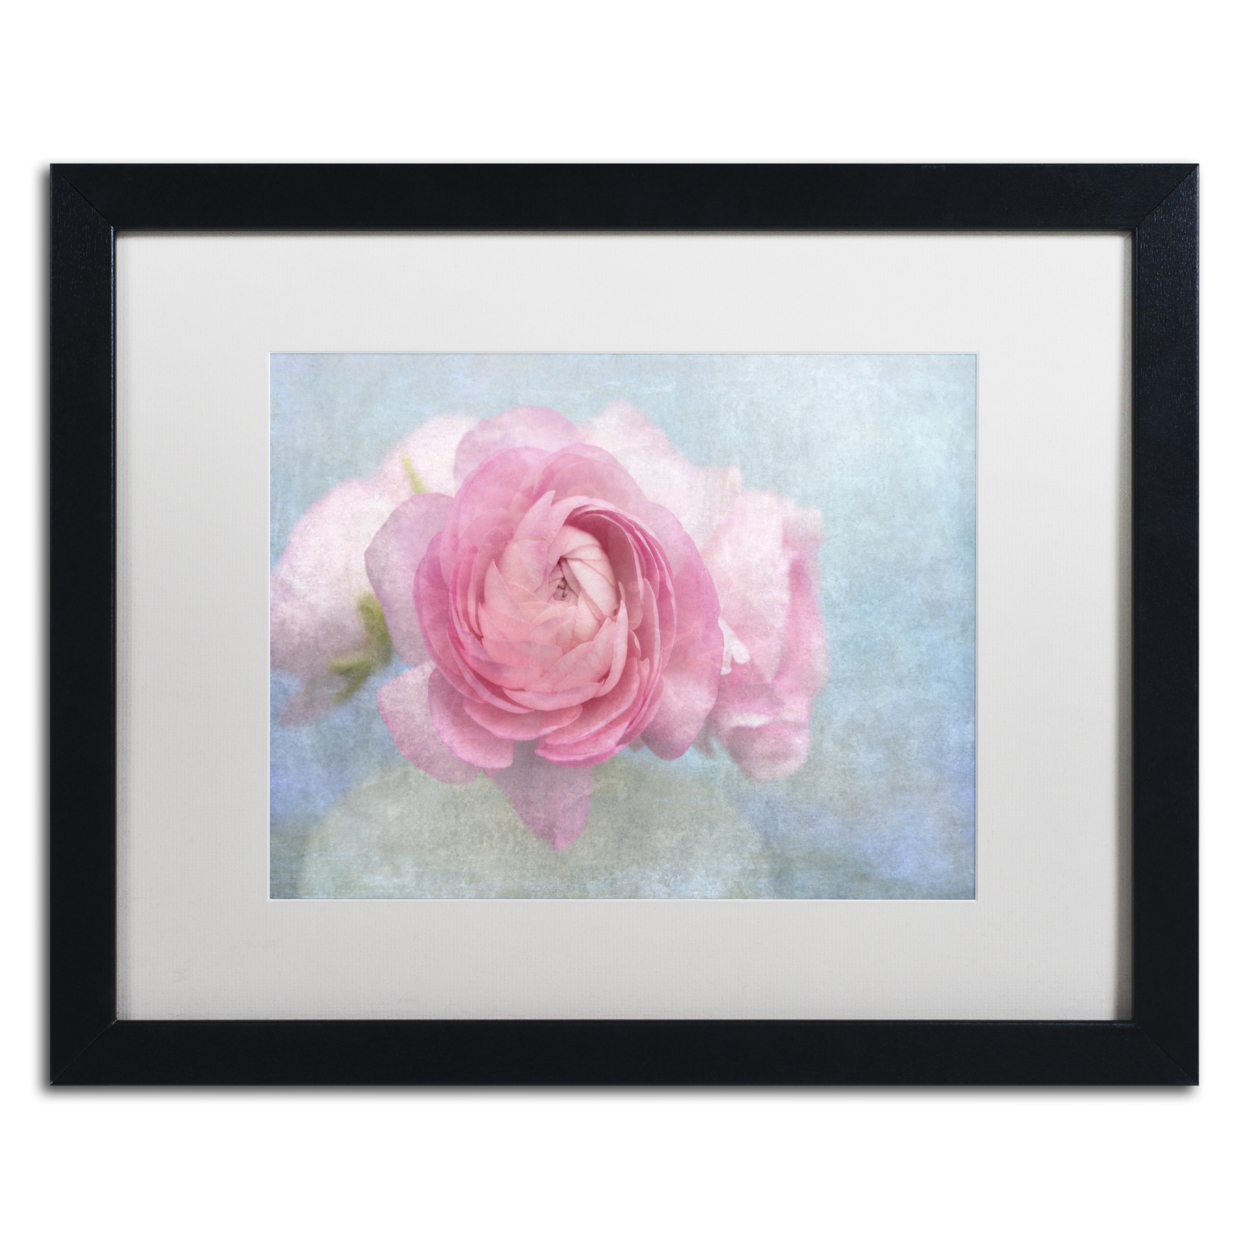 Cora Niele 'Pink Persian Buttercup Still Life' Black Wooden Framed Art 18 X 22 Inches